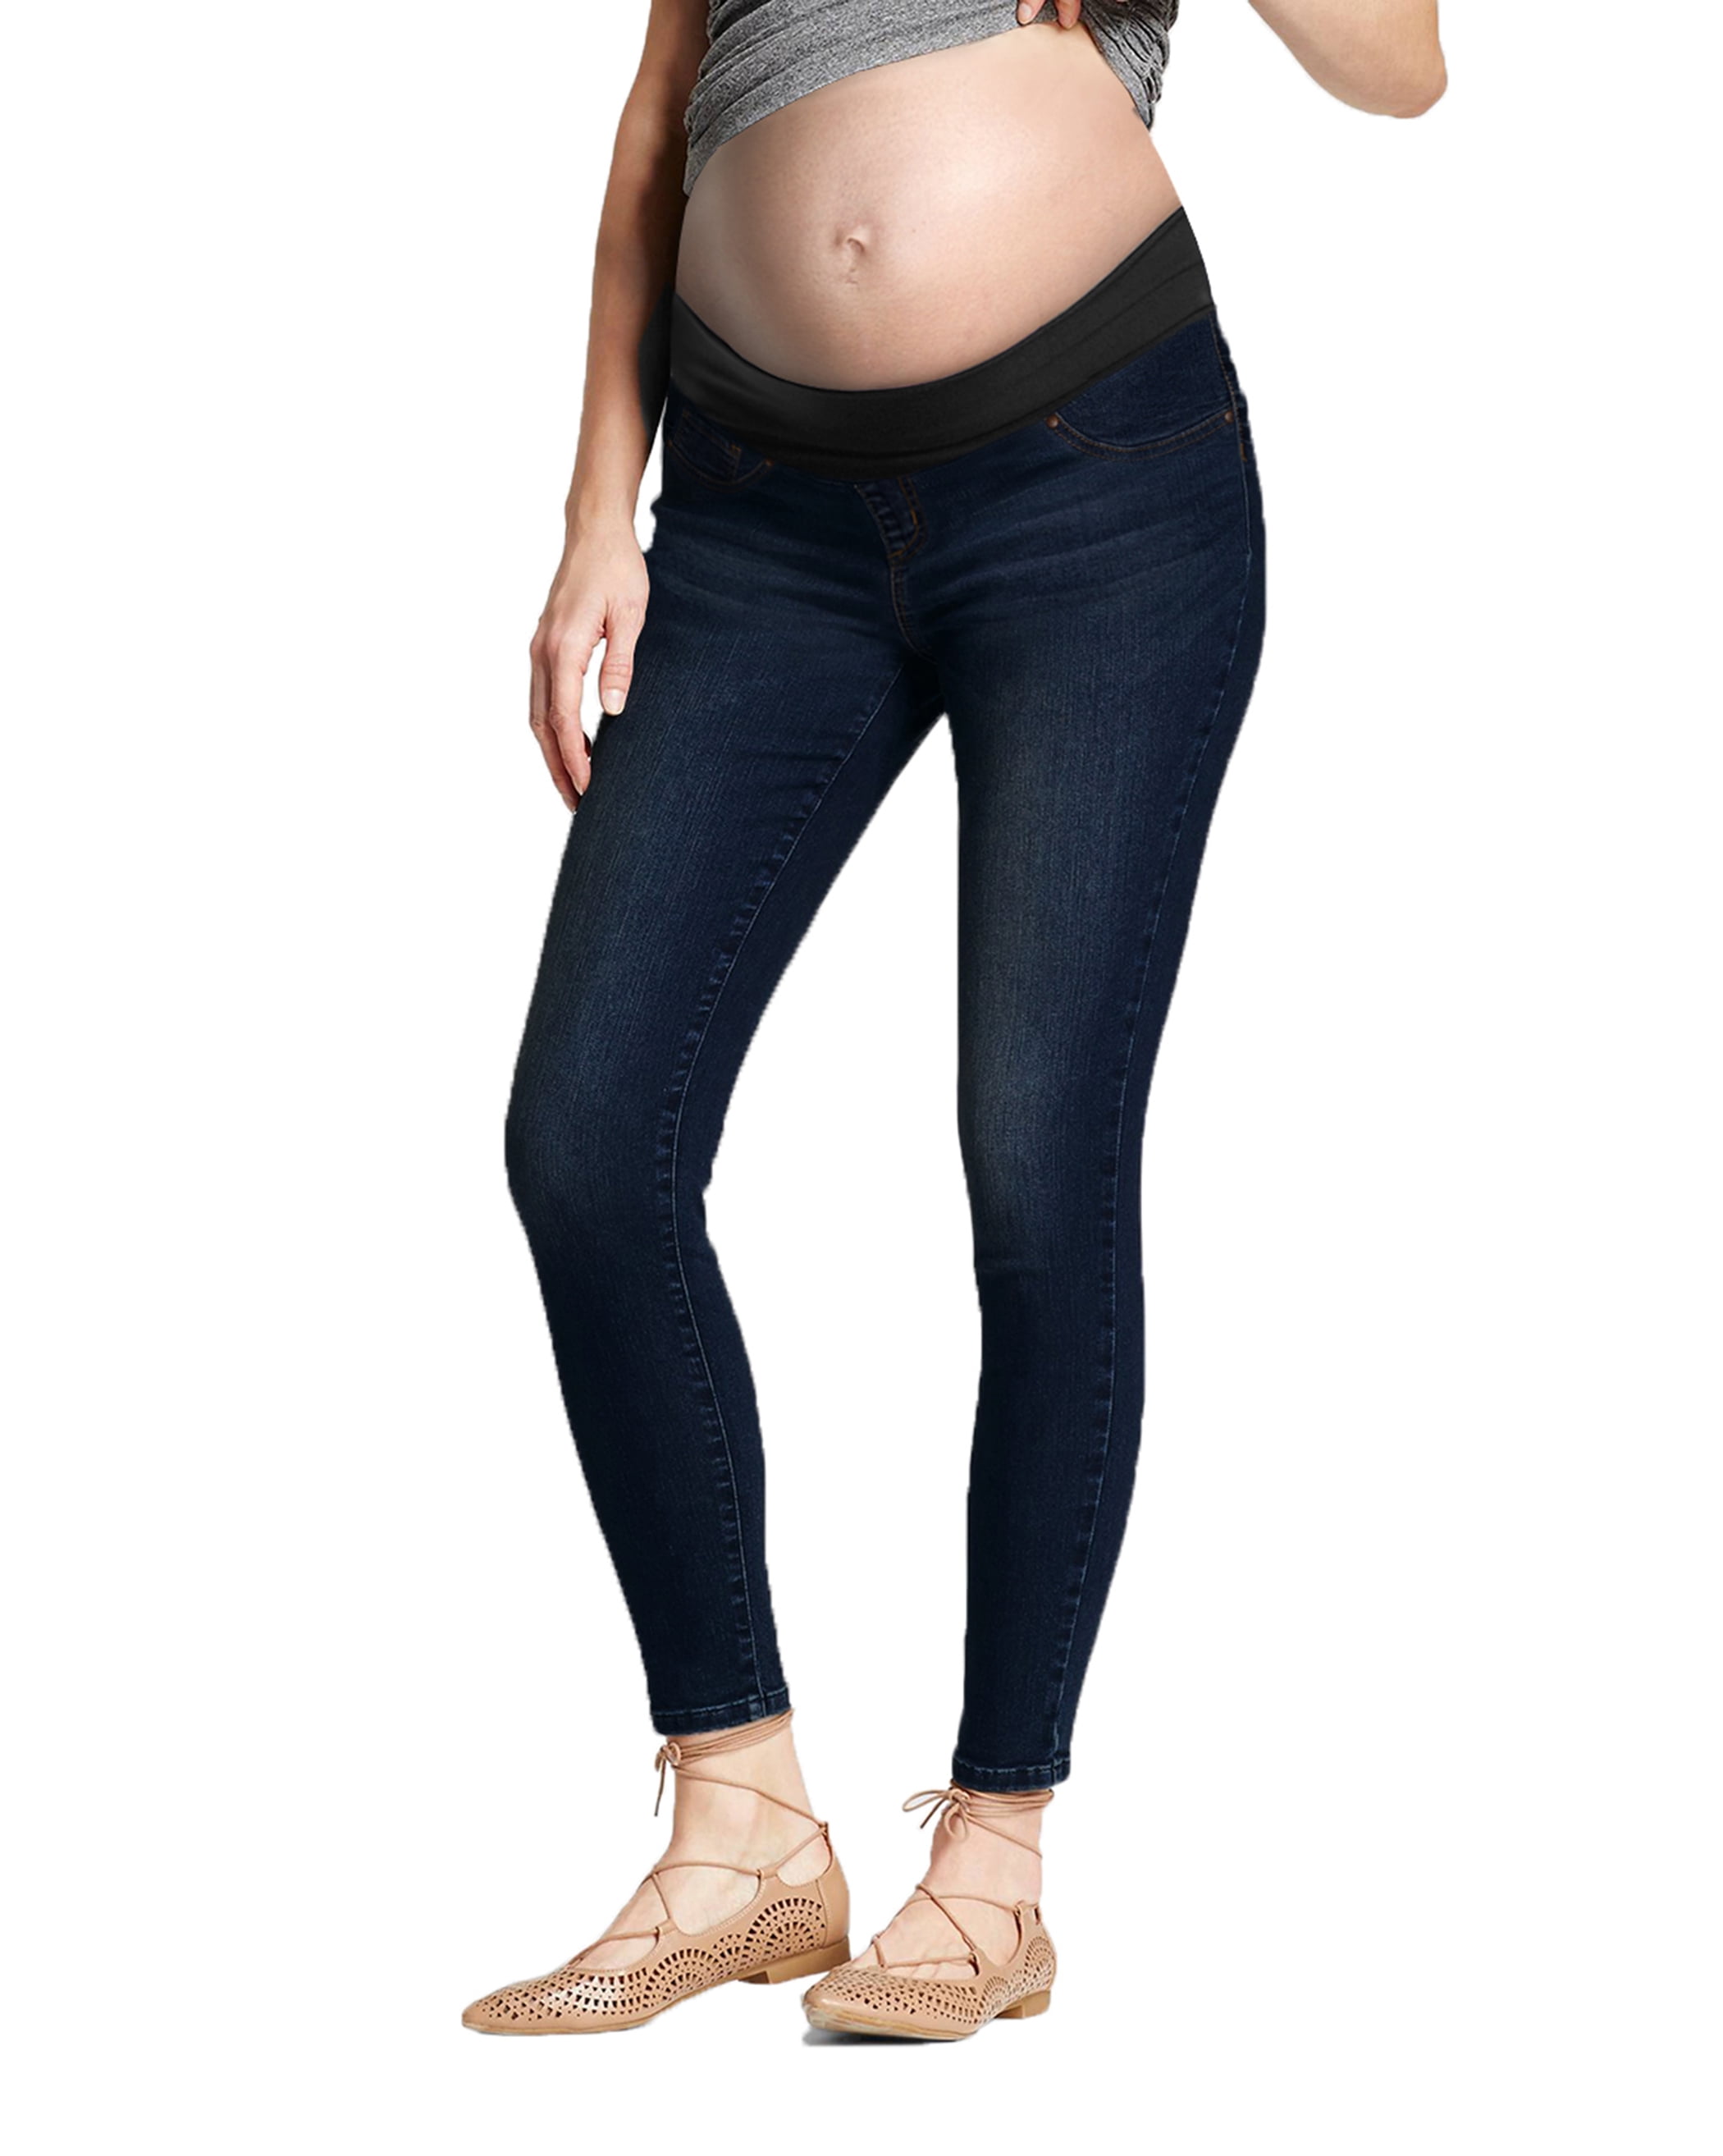  Maternity Jeans - Ingrid & Isabel / Maternity Jeans / Maternity:  Clothing, Shoes & Jewelry